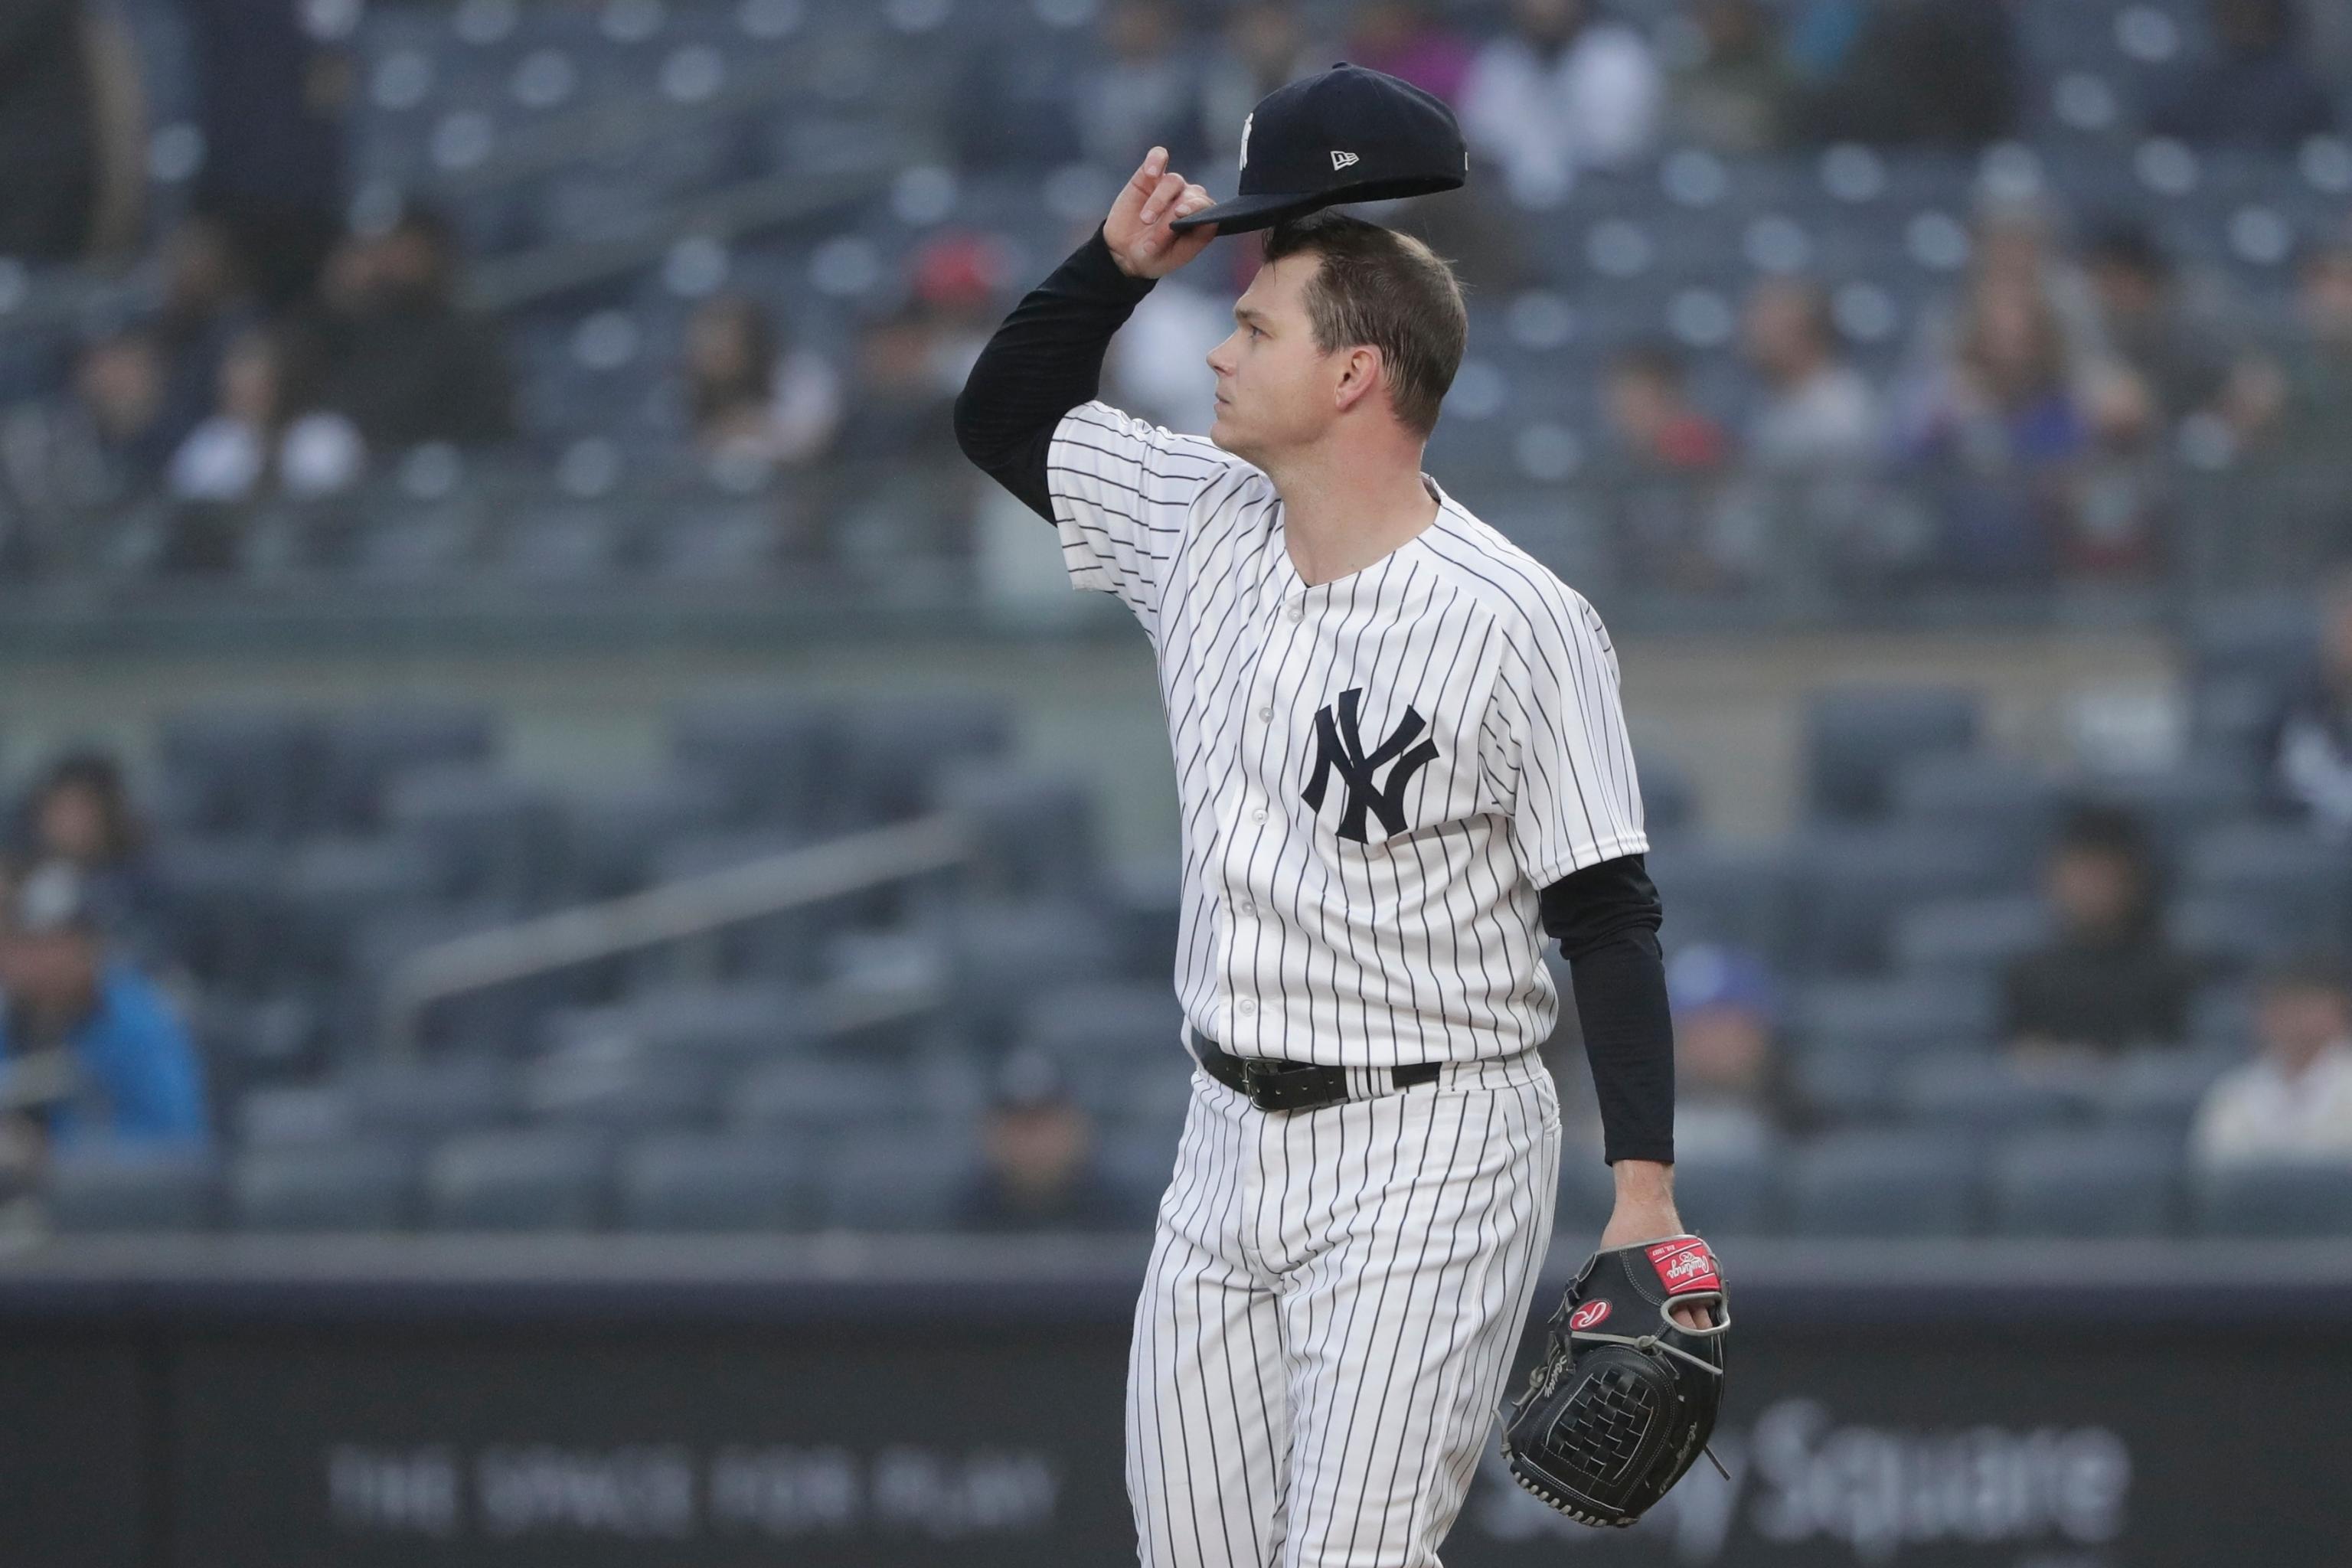 Yankees trading former Vandy pitcher Sonny Gray to Reds